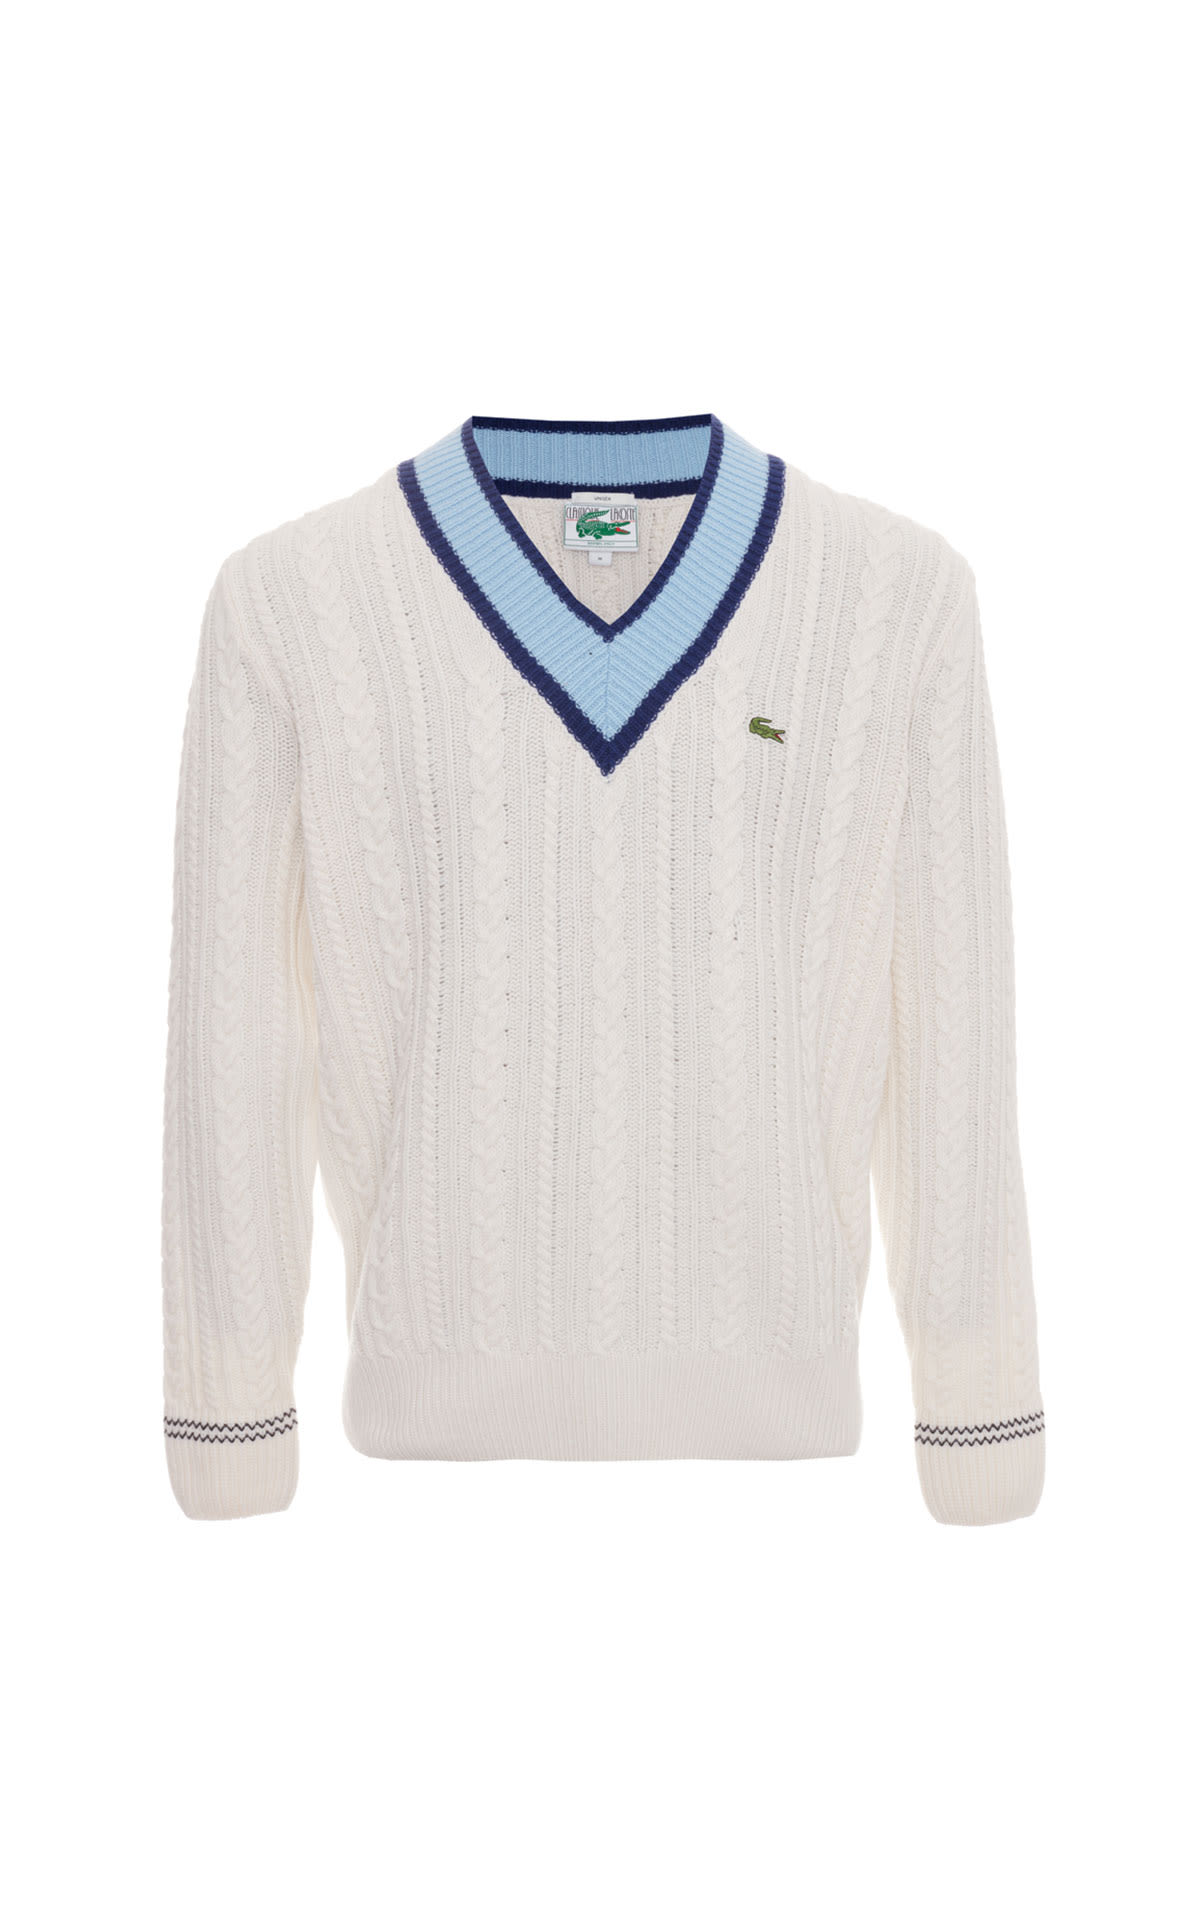 Lacoste Crew knitwear from Bicester Village